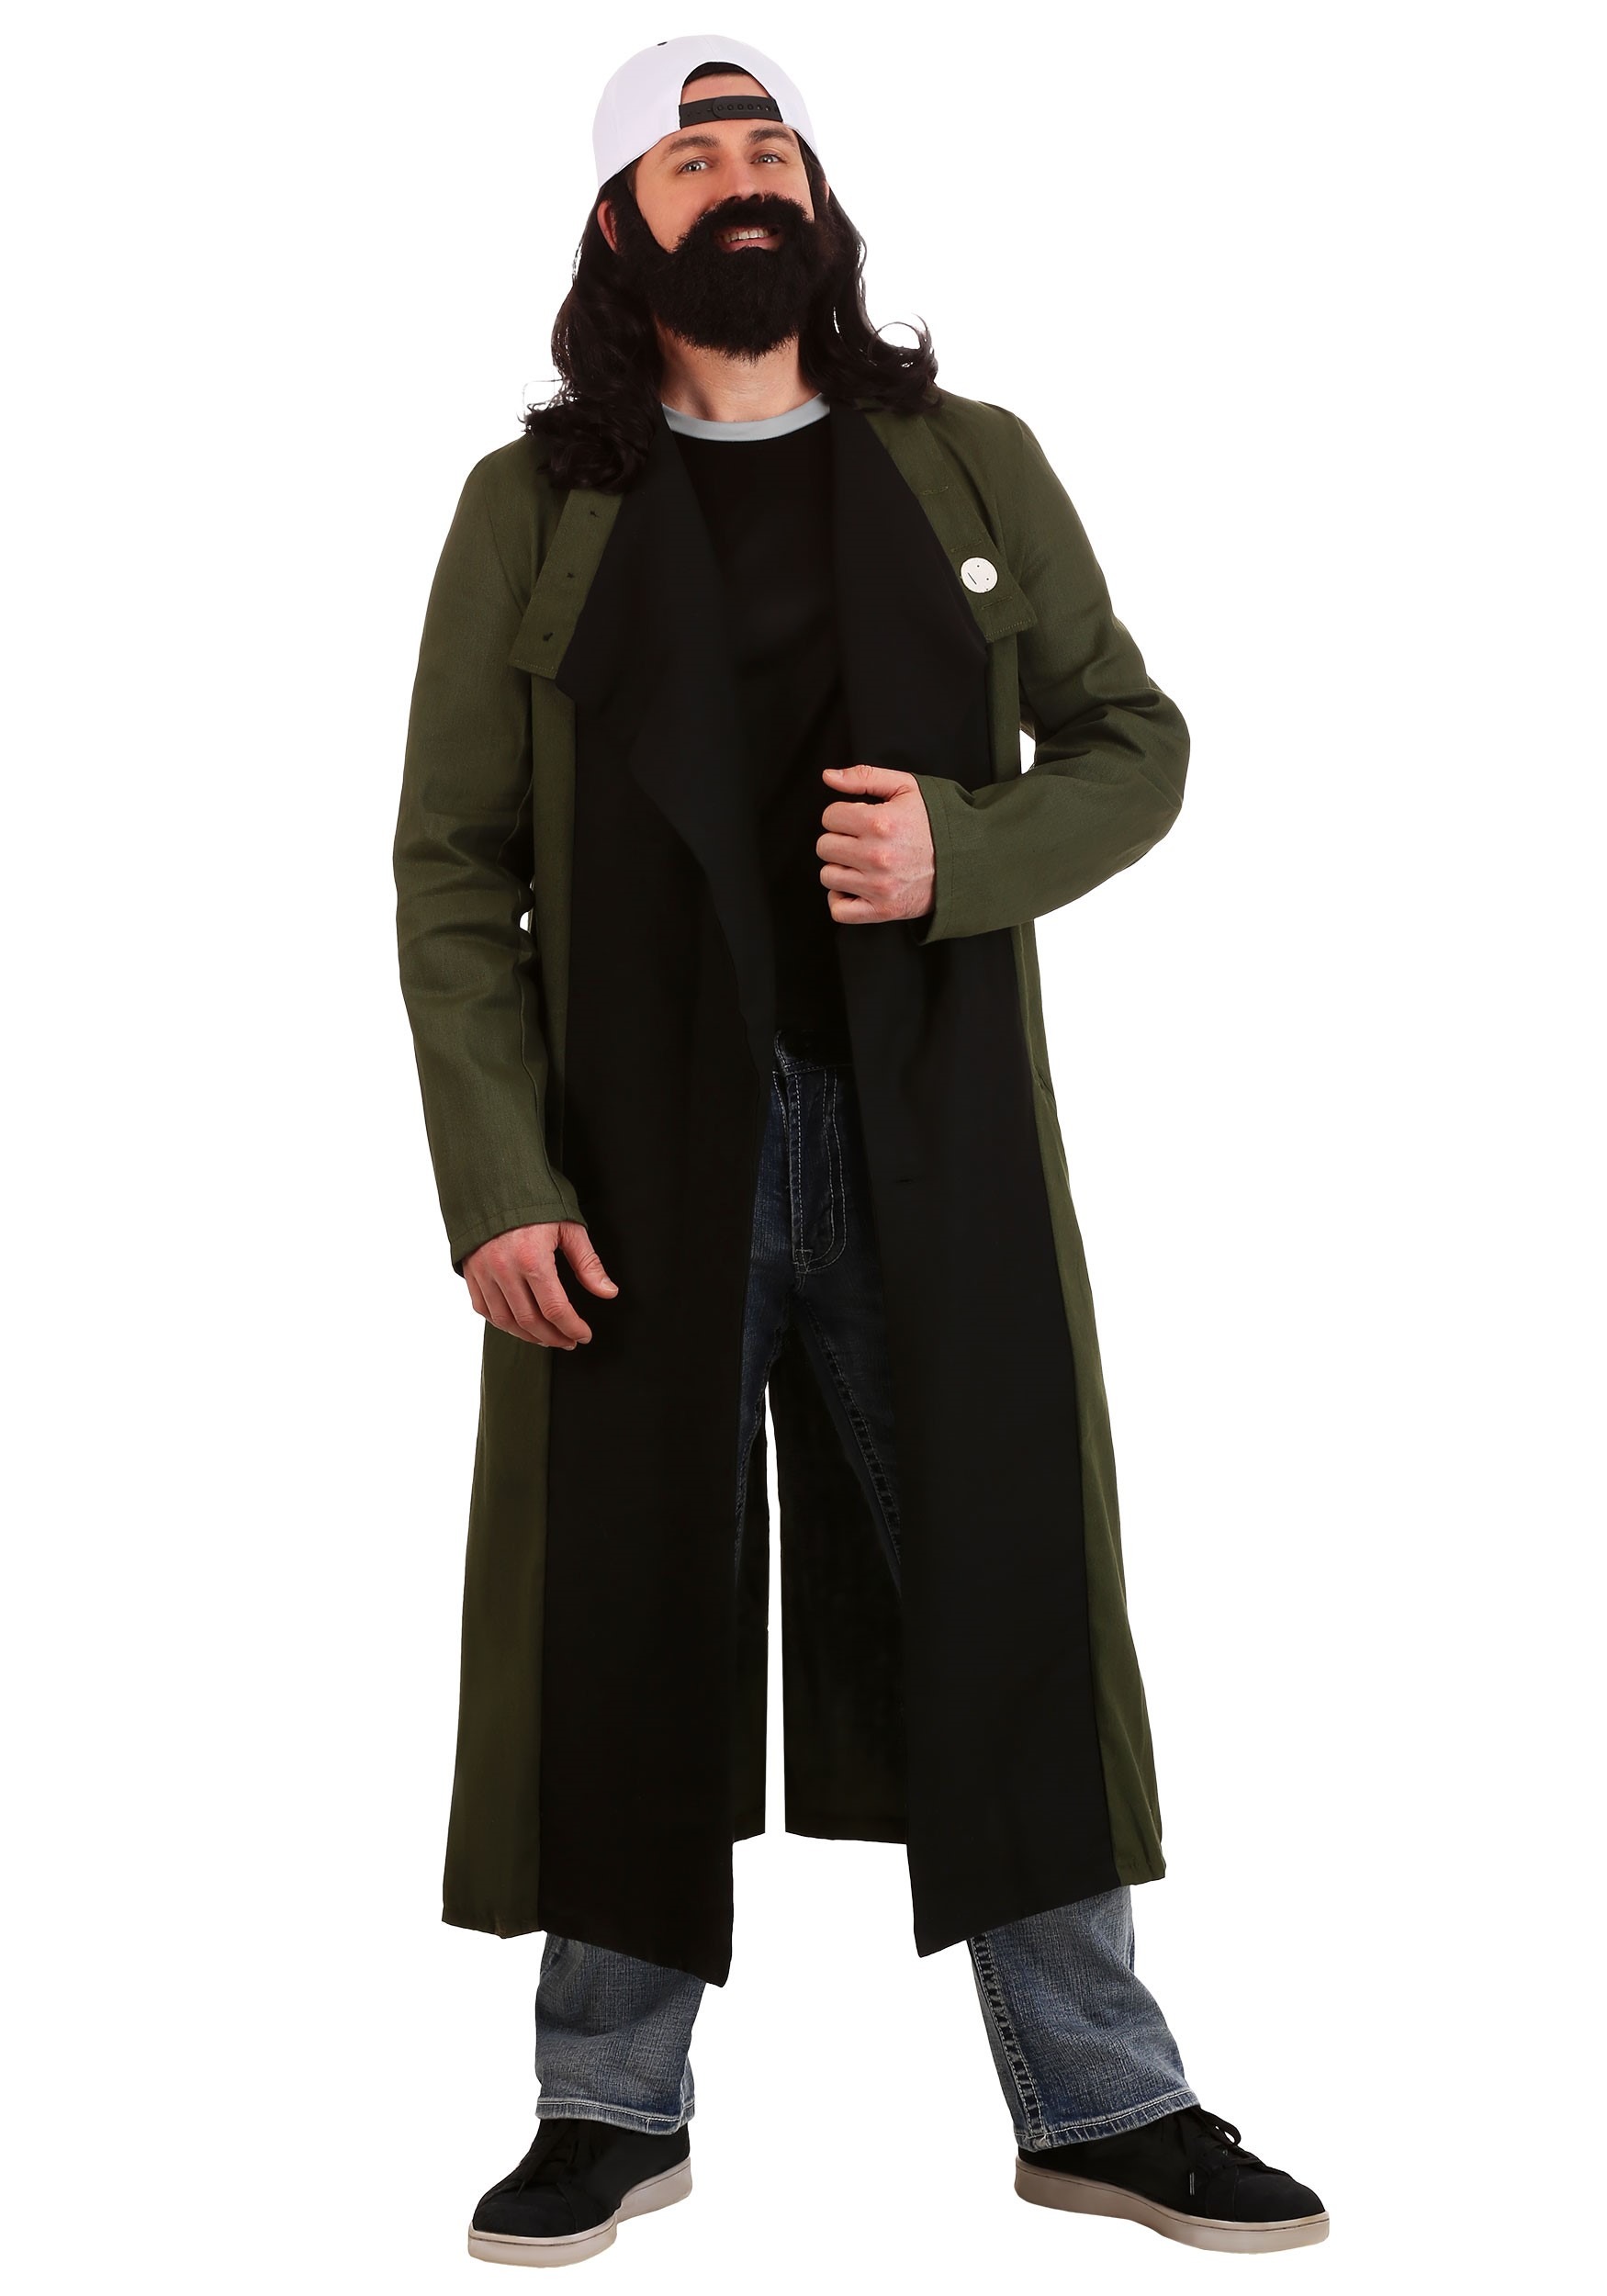 Jay and Silent Bob Silent Bob Costume for Adults